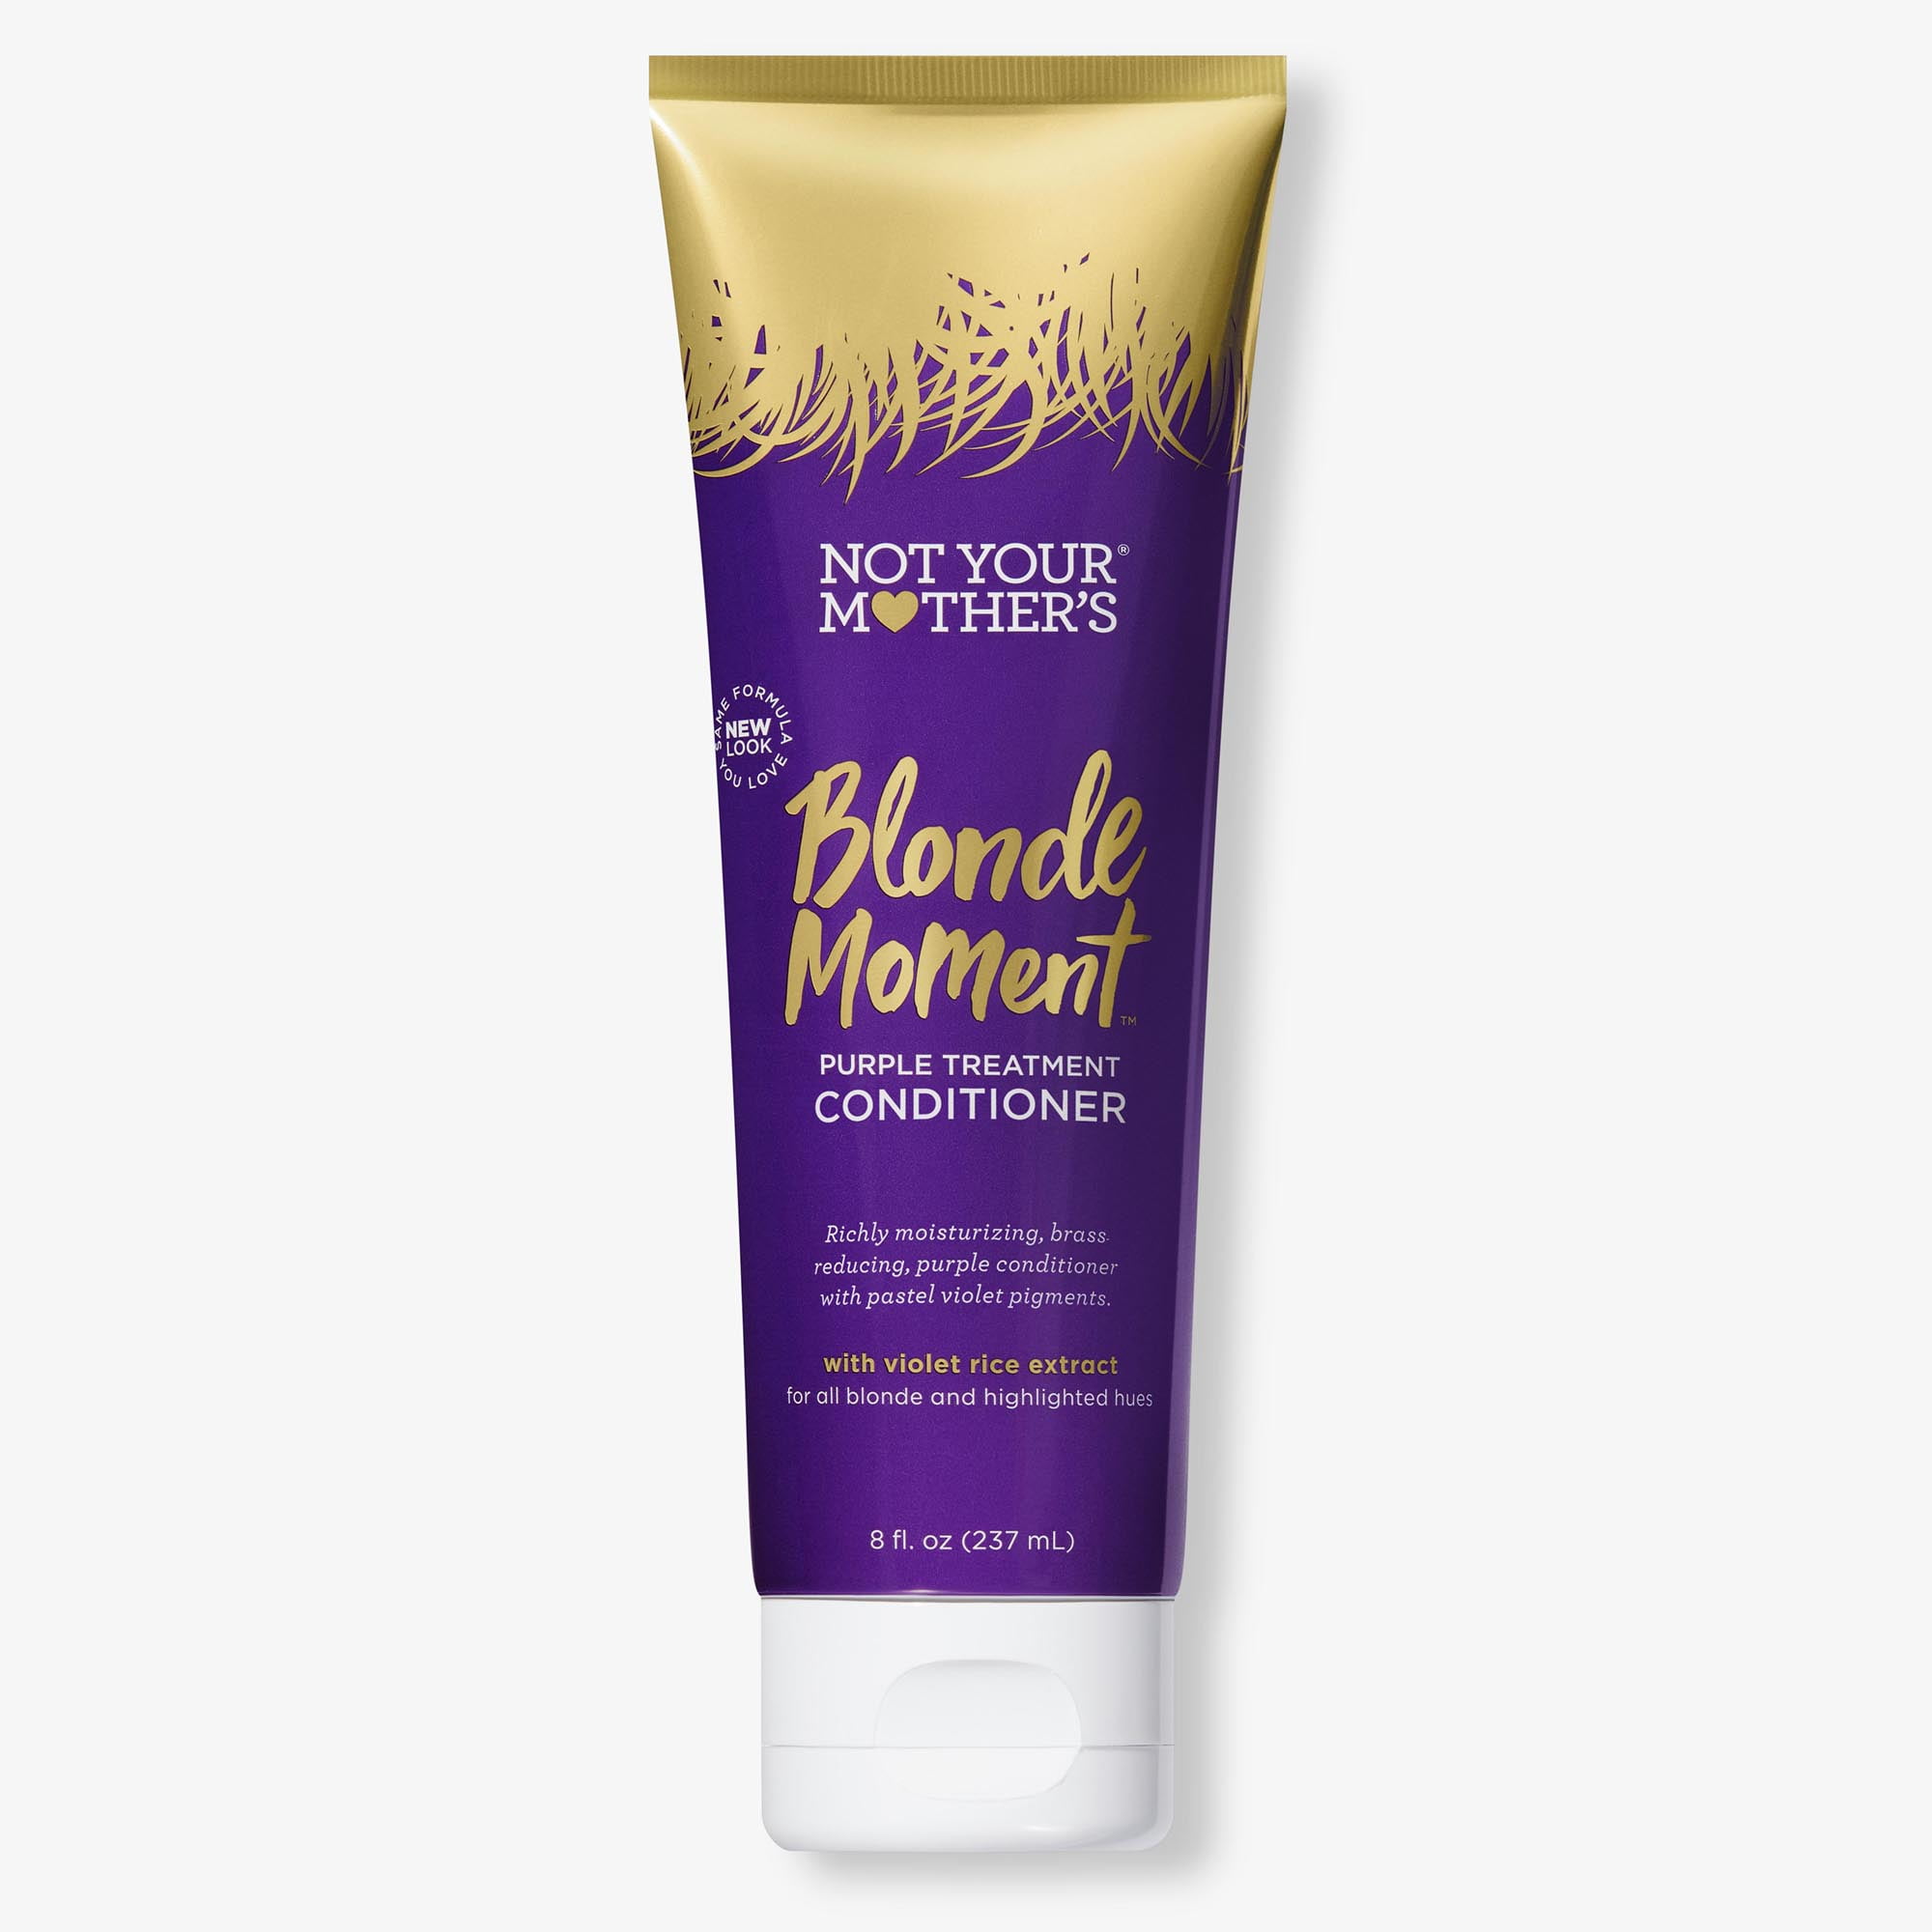 Not Your Mother's Treatment Conditioner Blonde Moment